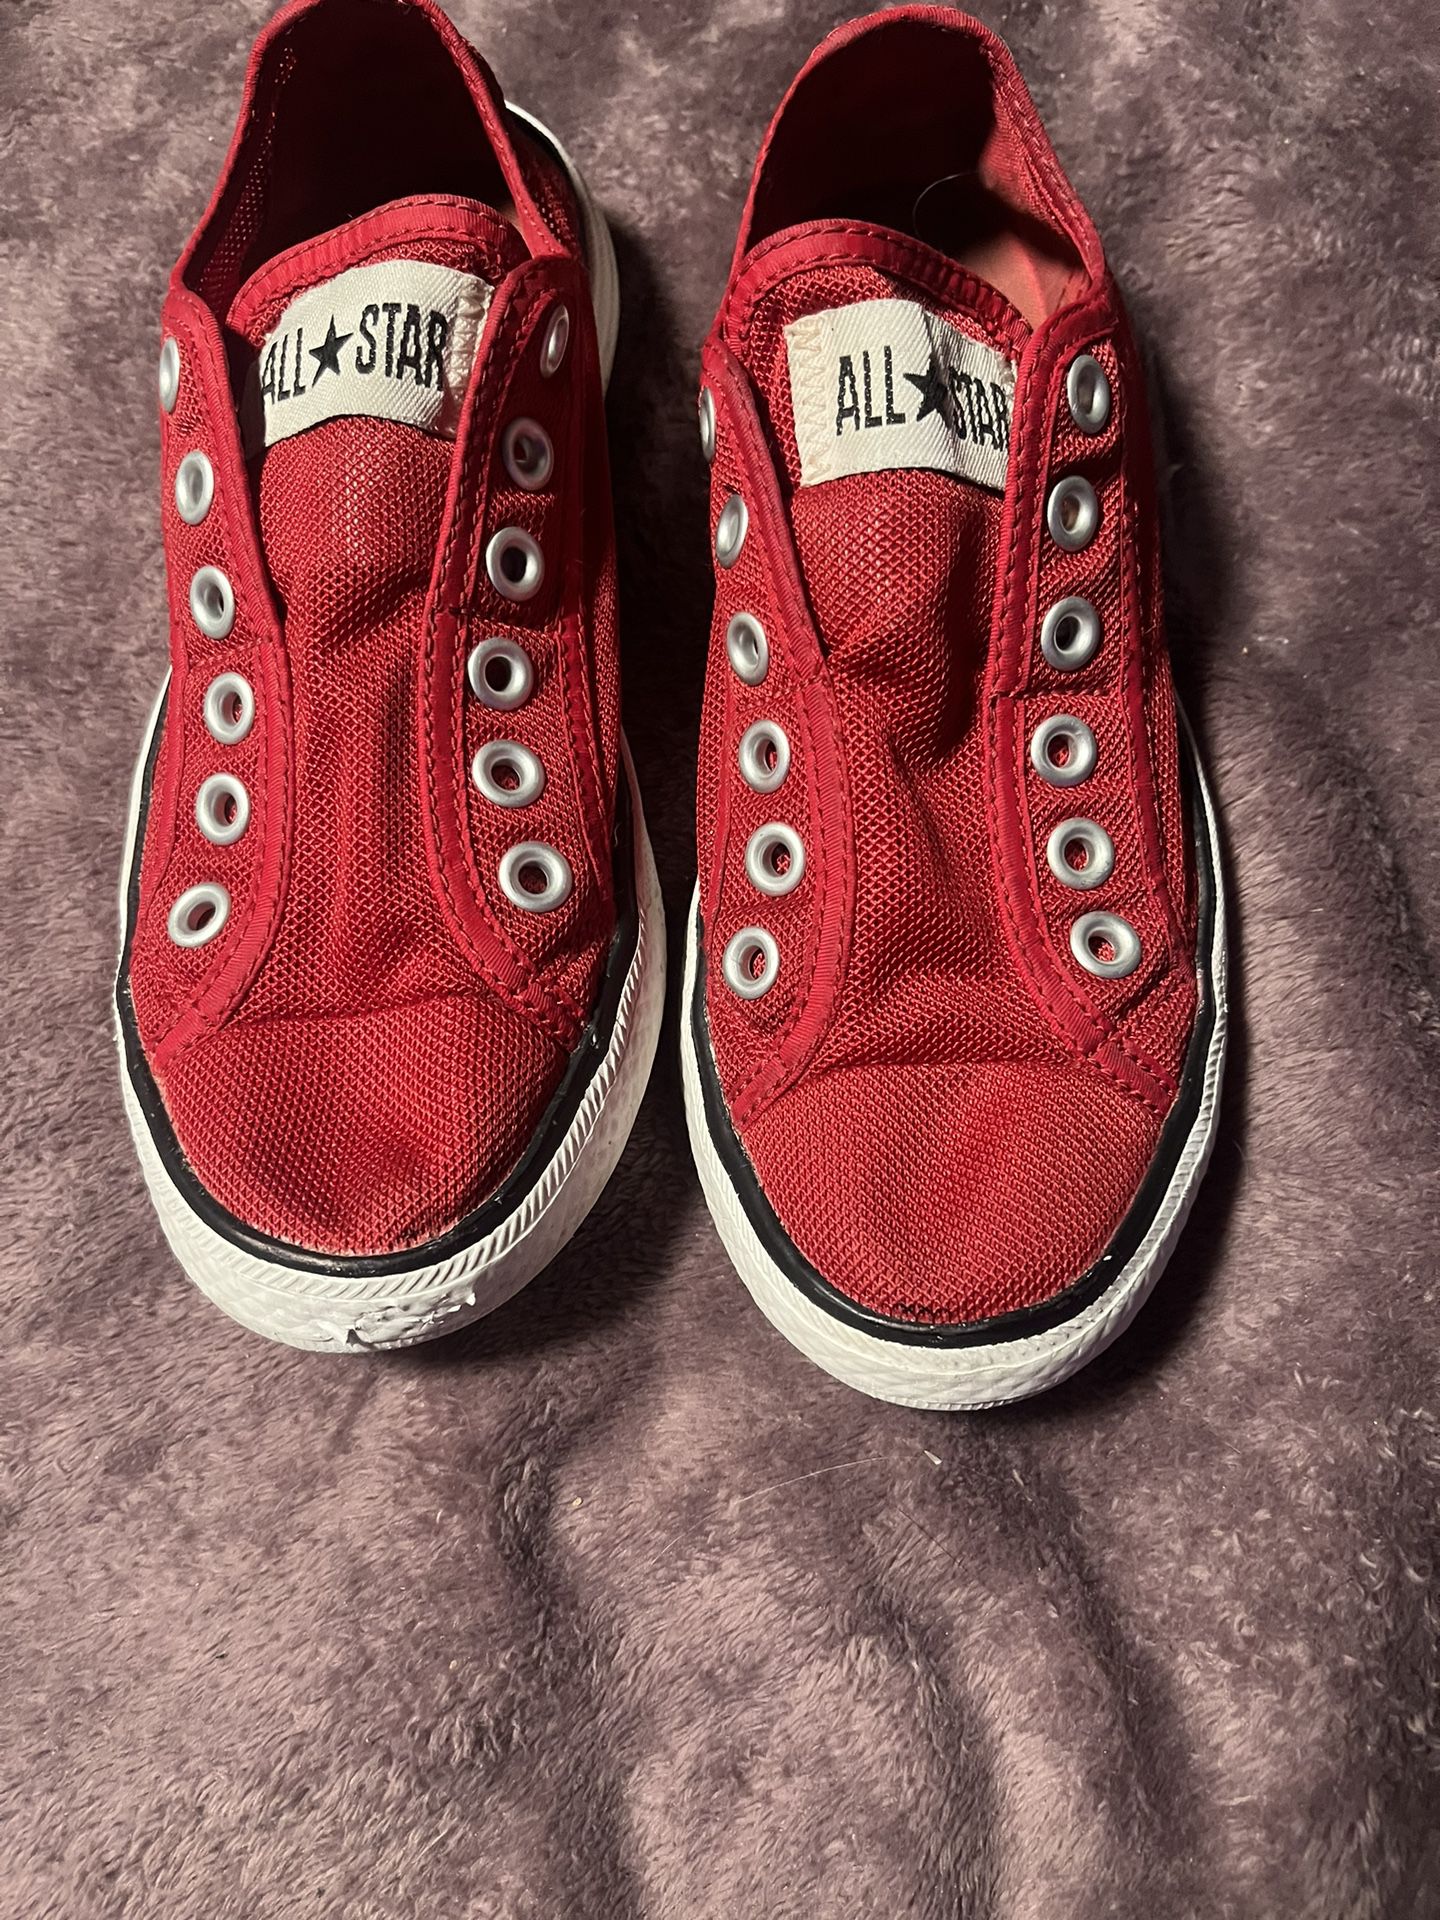 Hjemland vært Kvadrant Converse Chuck Taylor All Star Women Sz 6 Men's 4 Shoes Red Mesh Laceless  Slipon for Sale in Thornton, CO - OfferUp